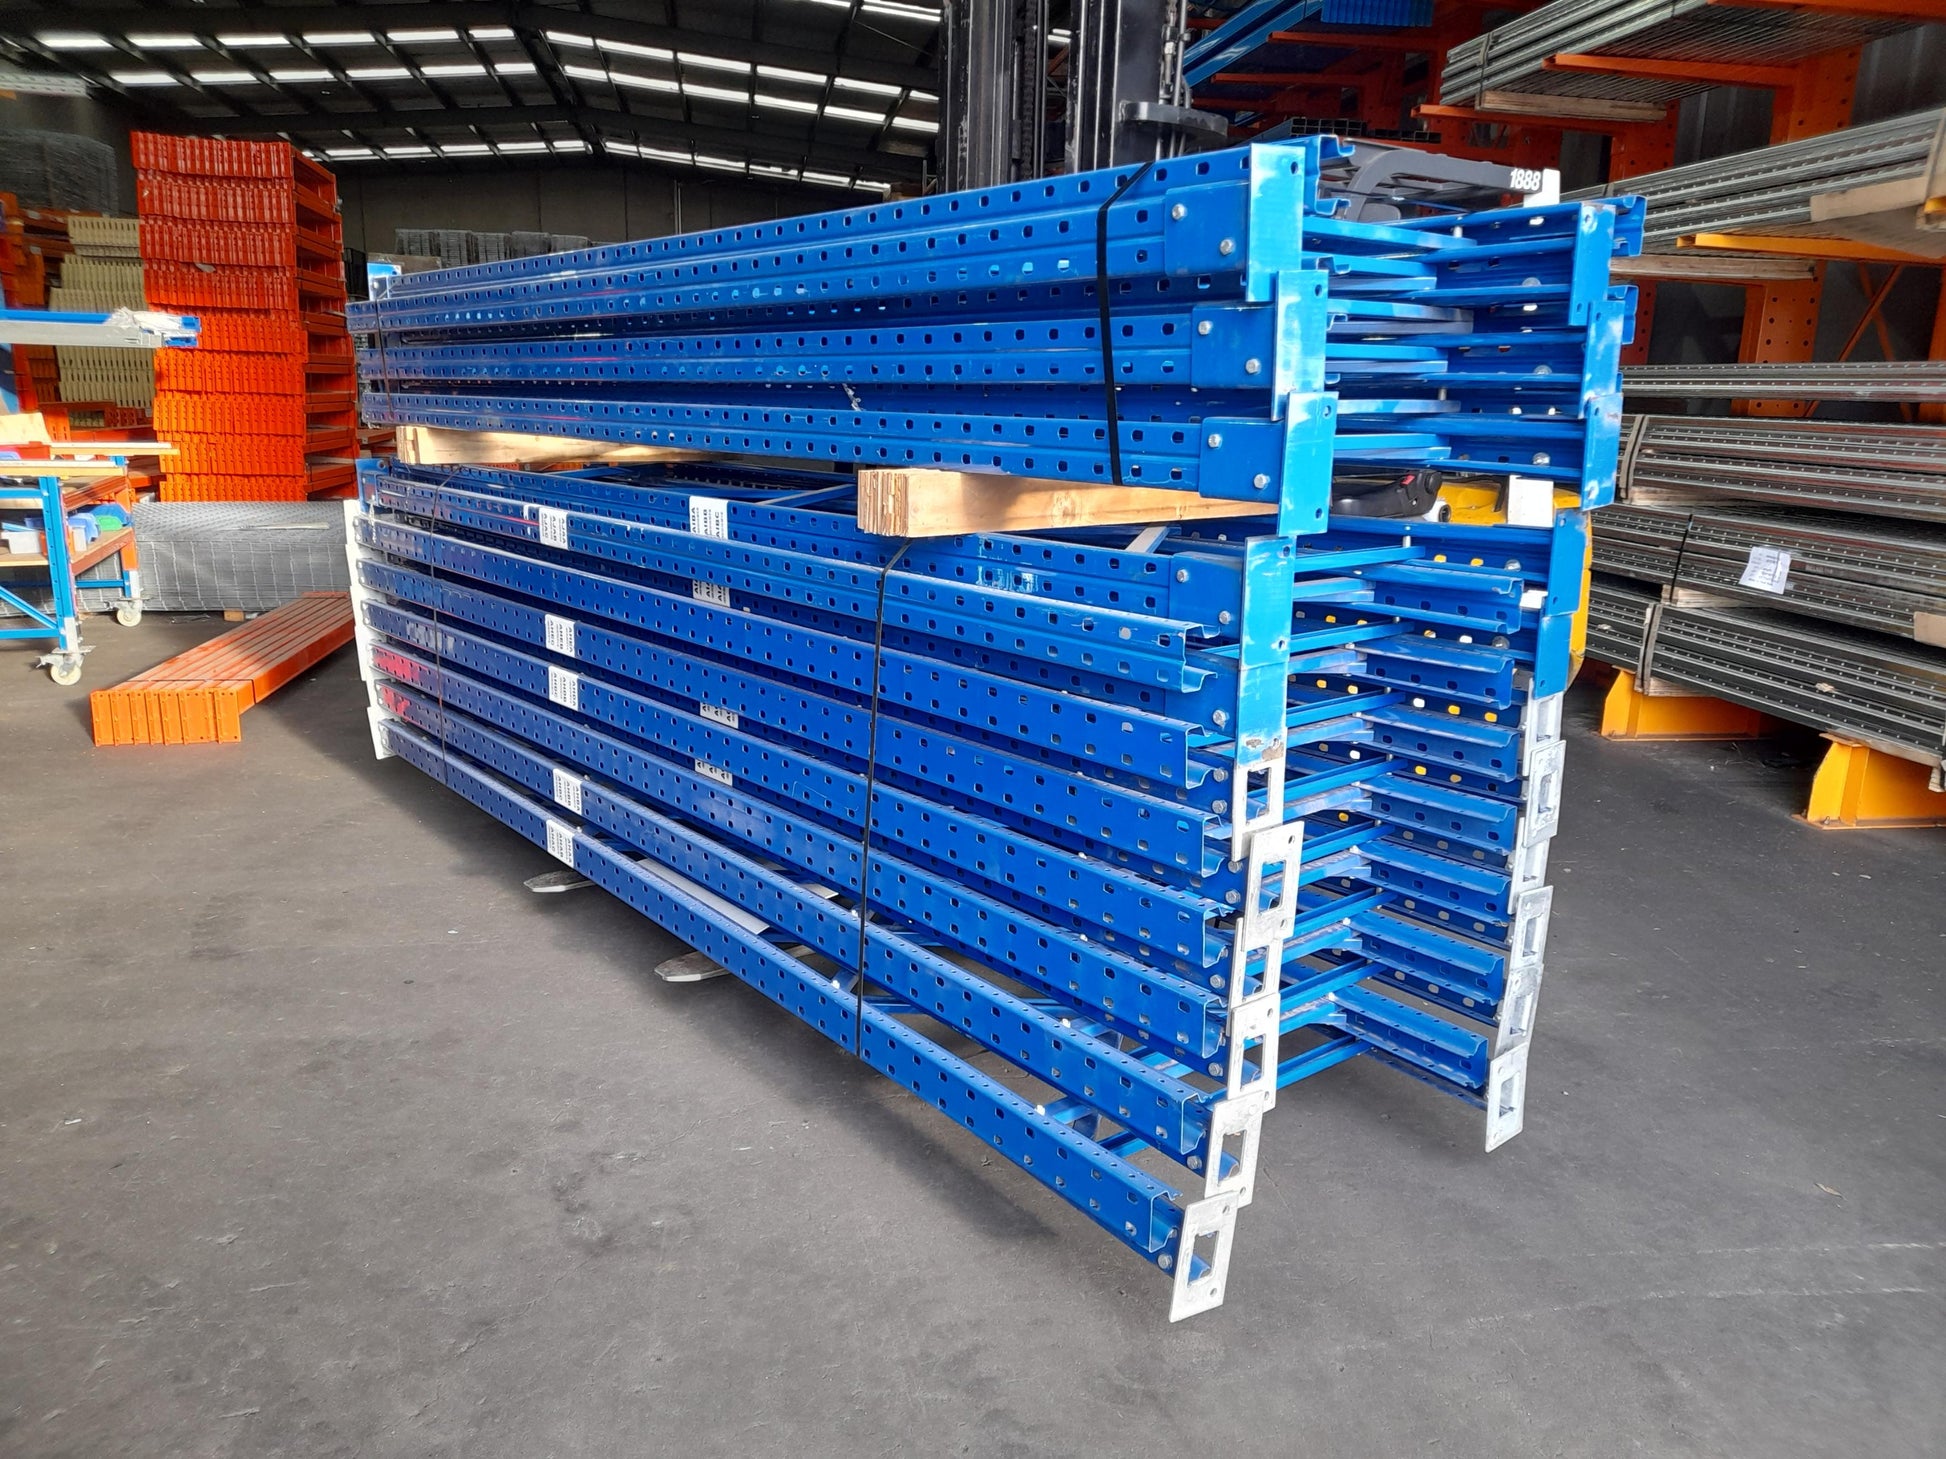 ReadyRack Used Second Hand Pallet Racking